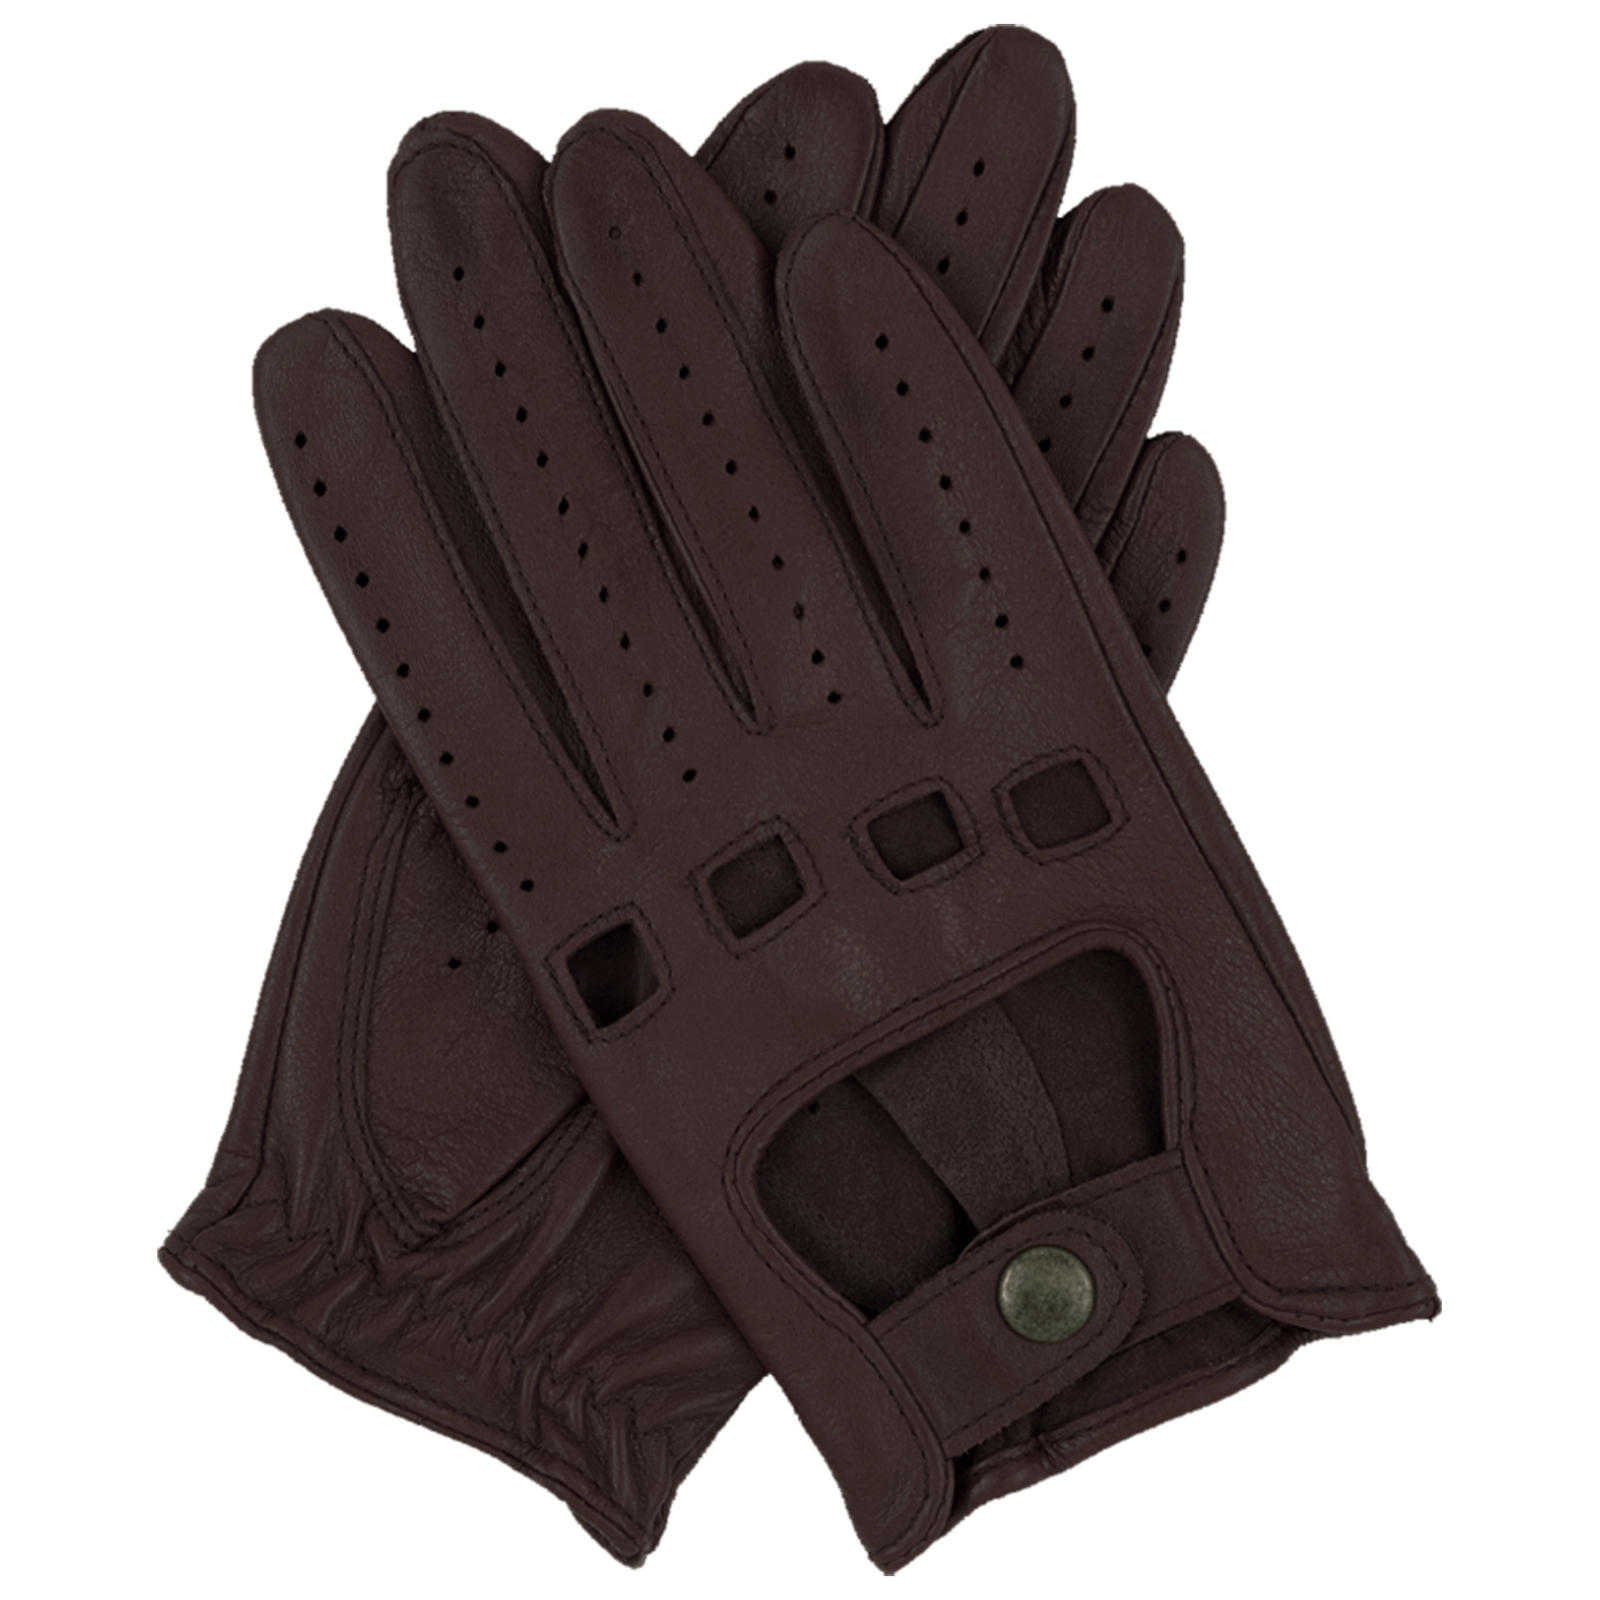 DENTS Ladies Kangaroo Leather Driving Gloves Unlined Winter Warm w GIFT ...